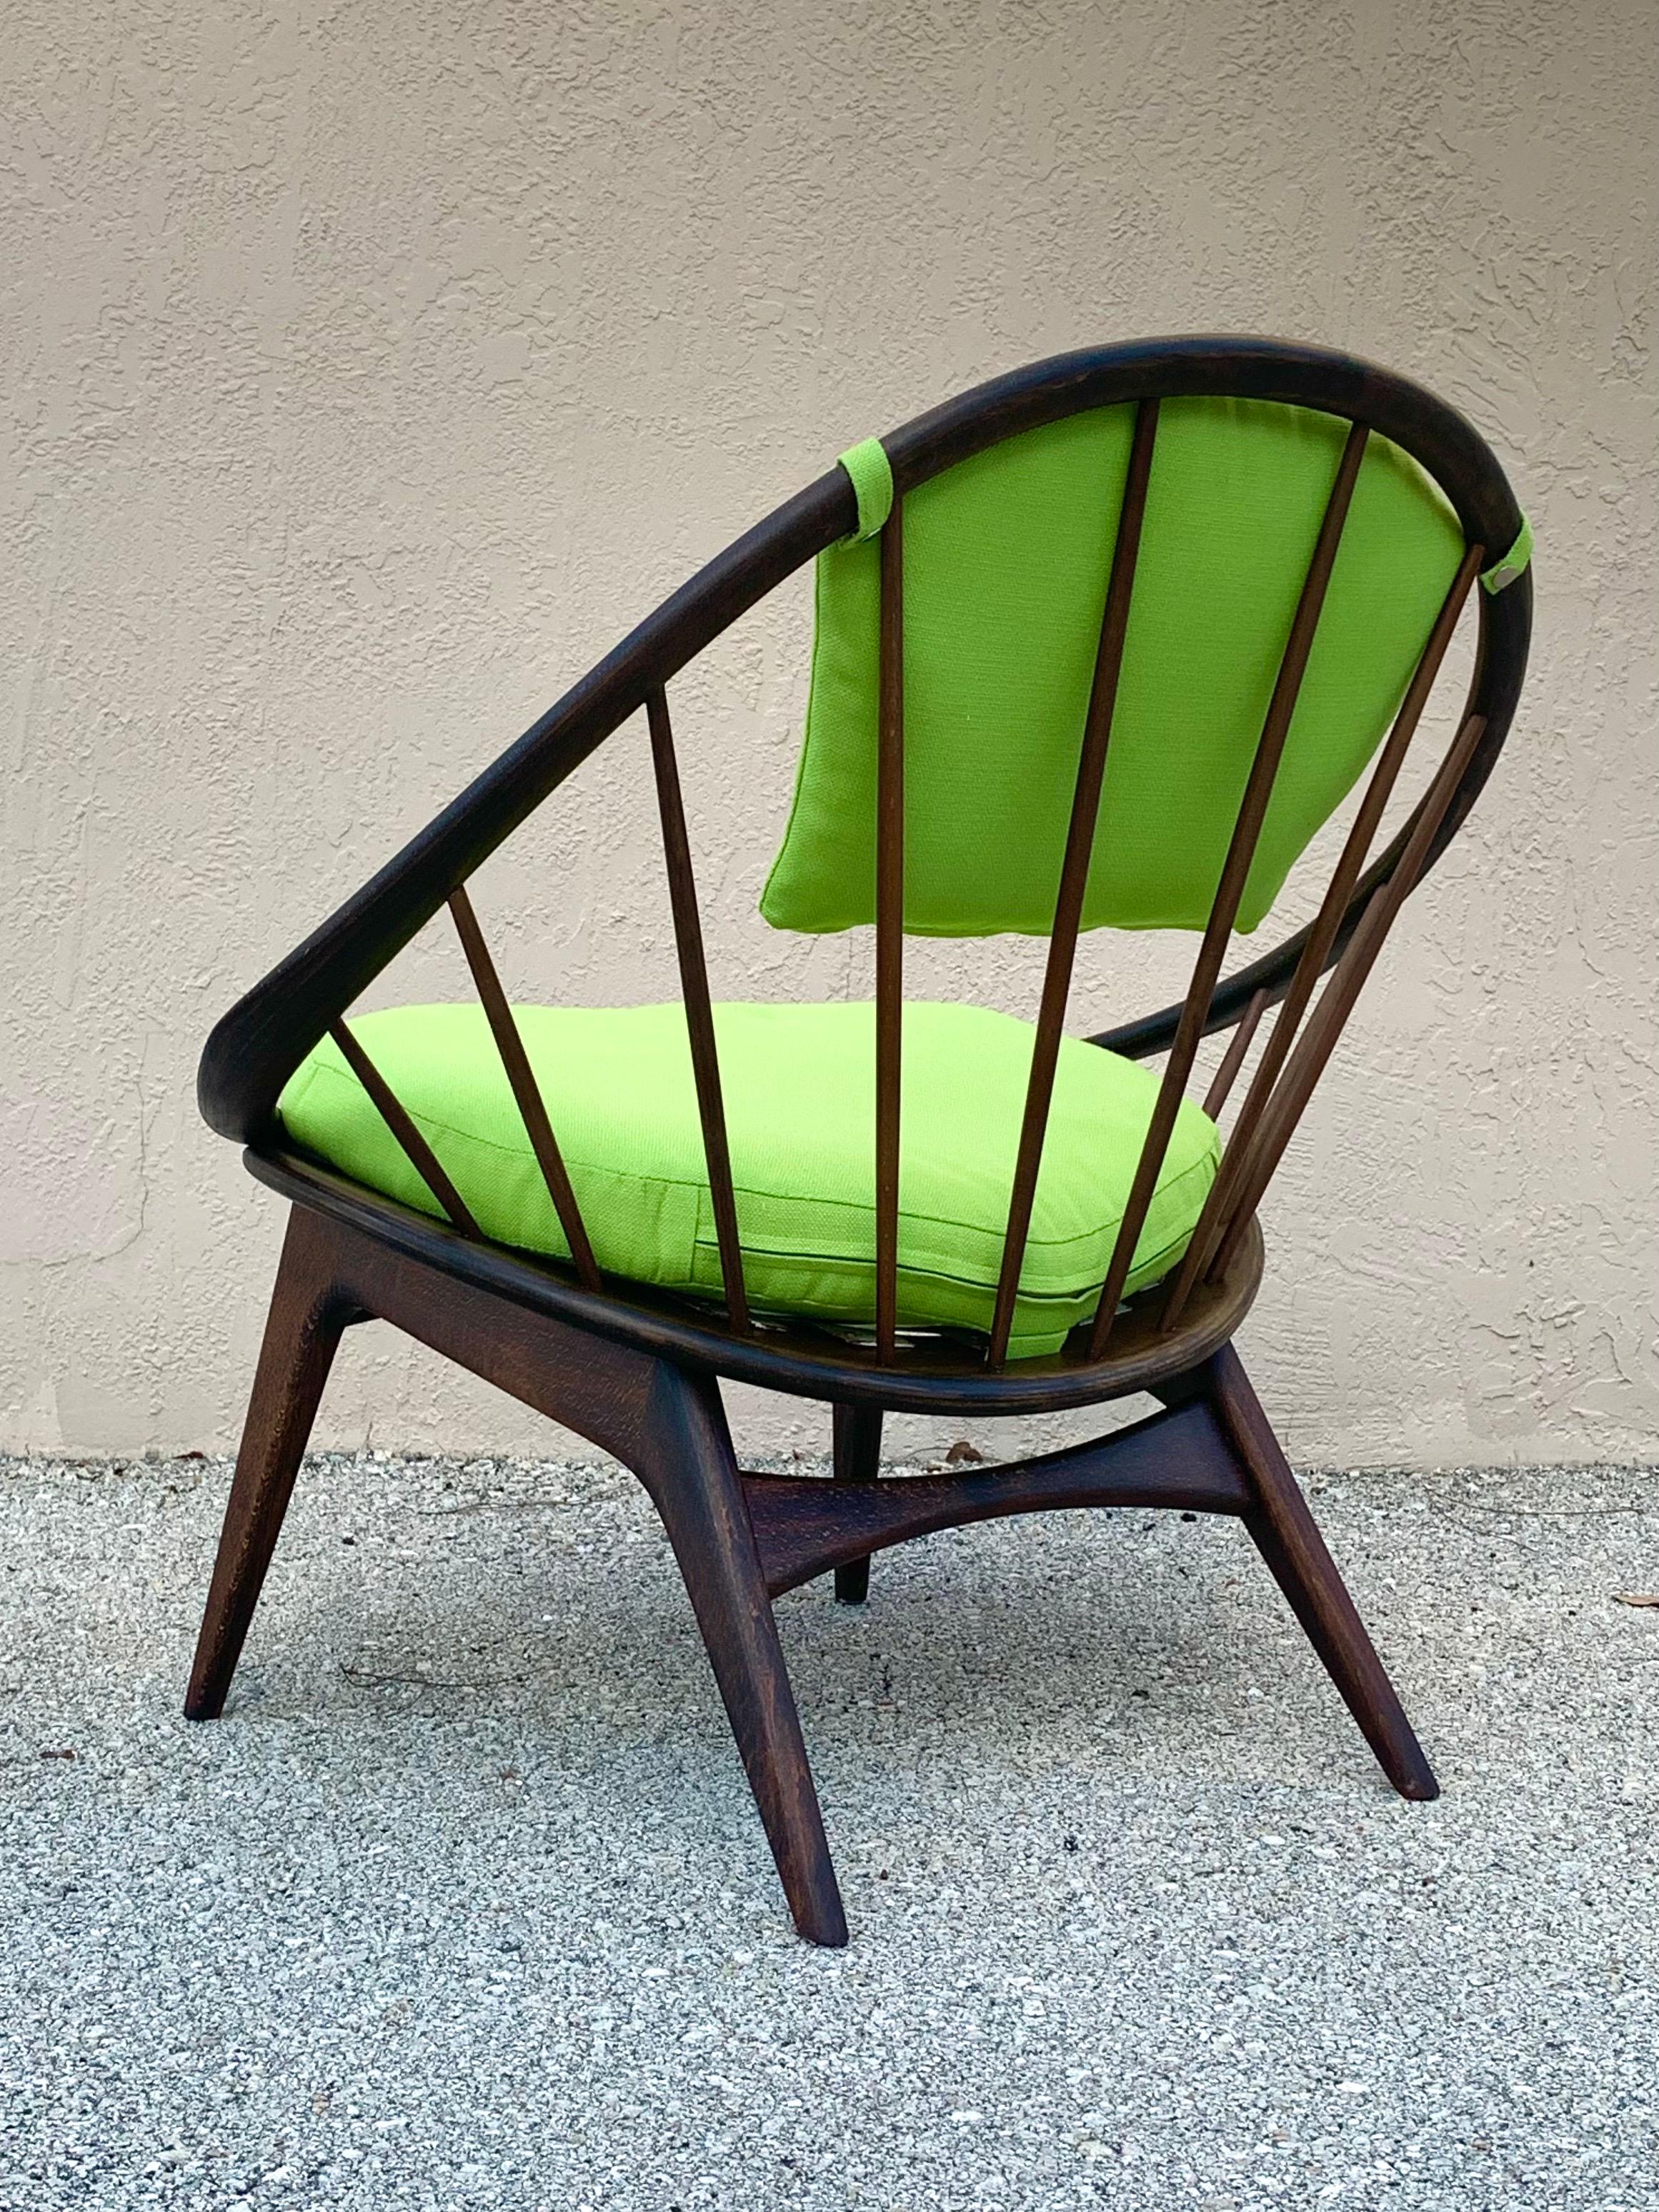 IB Kofod Larsen hoop chair. A hoop of plied walnut supported by a gorgeous display of spindles arranged in a peacock pattern. Recently refinished and reupholstered in a Bright green fabric. Made in Denmark. Would fit well in Mid-Century Modern,